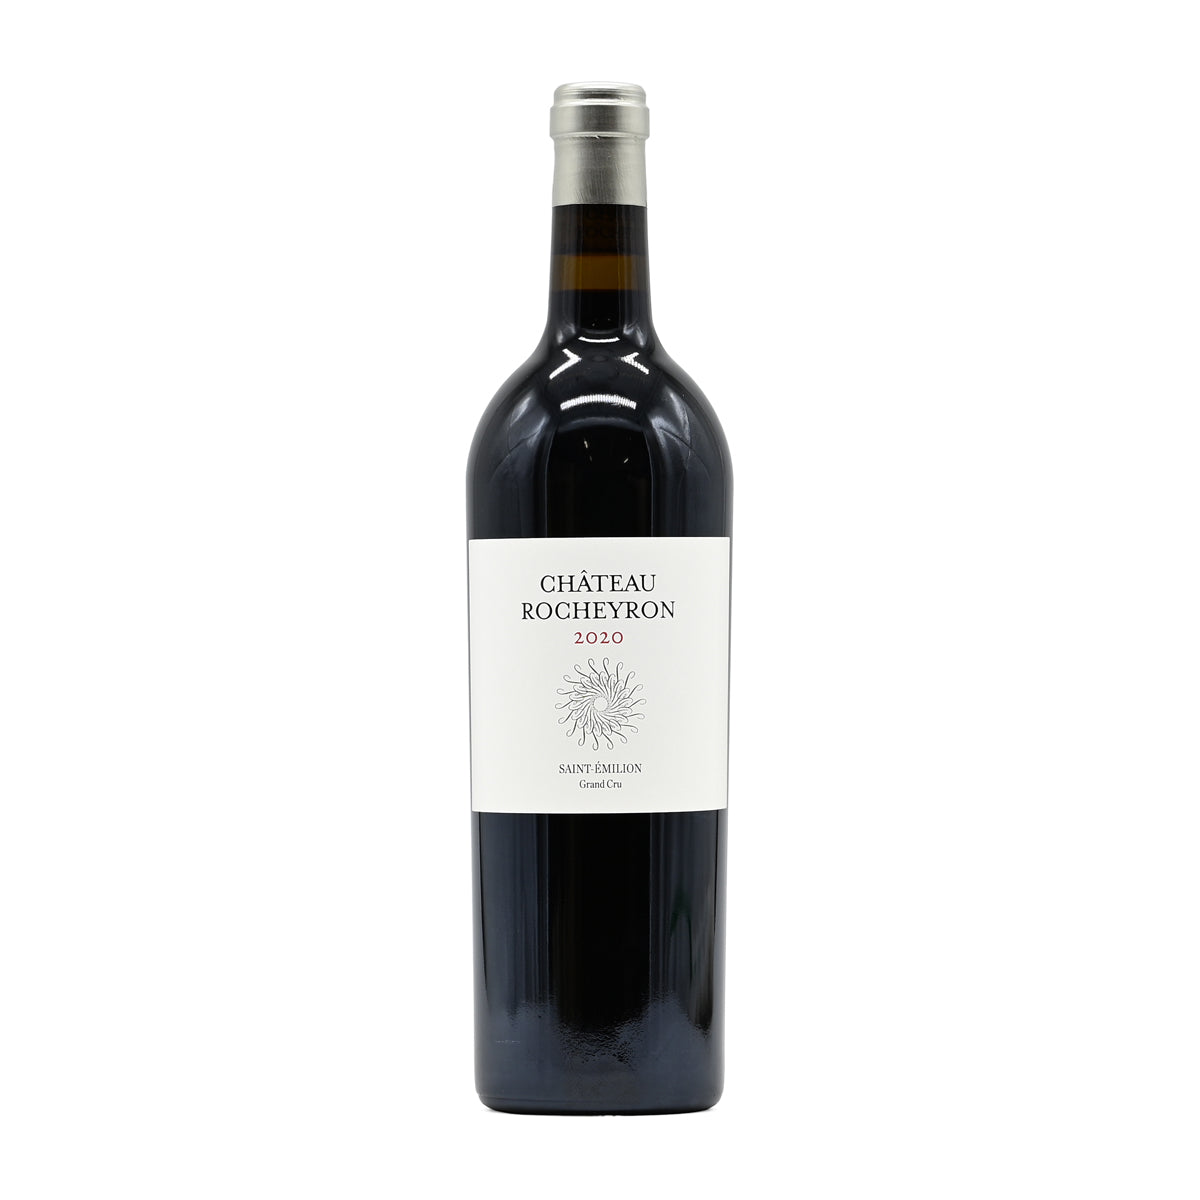 Château Rocheyron 2020, 750ml French red wine, from Saint-Emilion, Bordeaux, France – GDV Fine Wines, Hong Kong